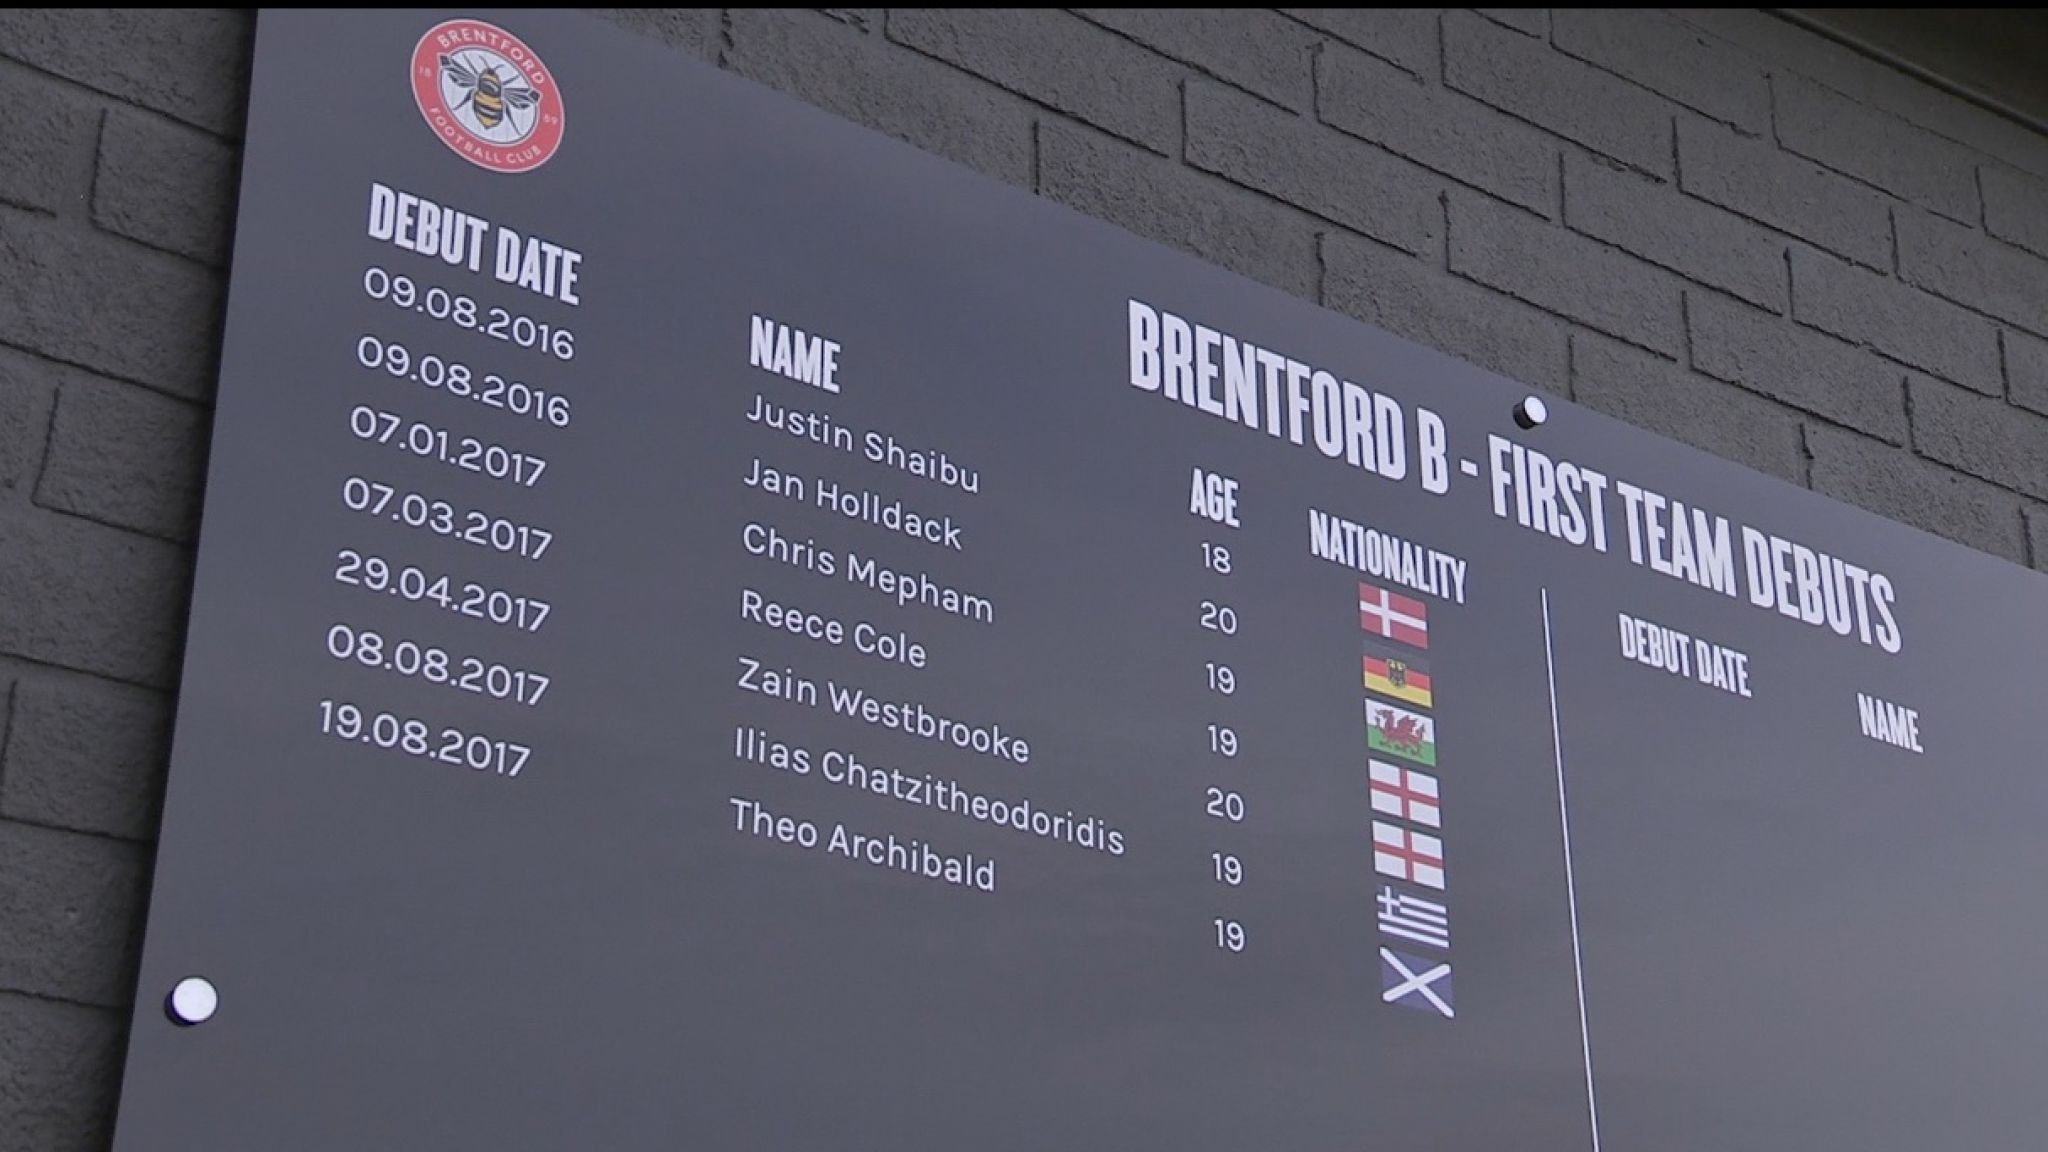 Brentford Display A Board For Their First-team Debutants - Display Device - HD Wallpaper 